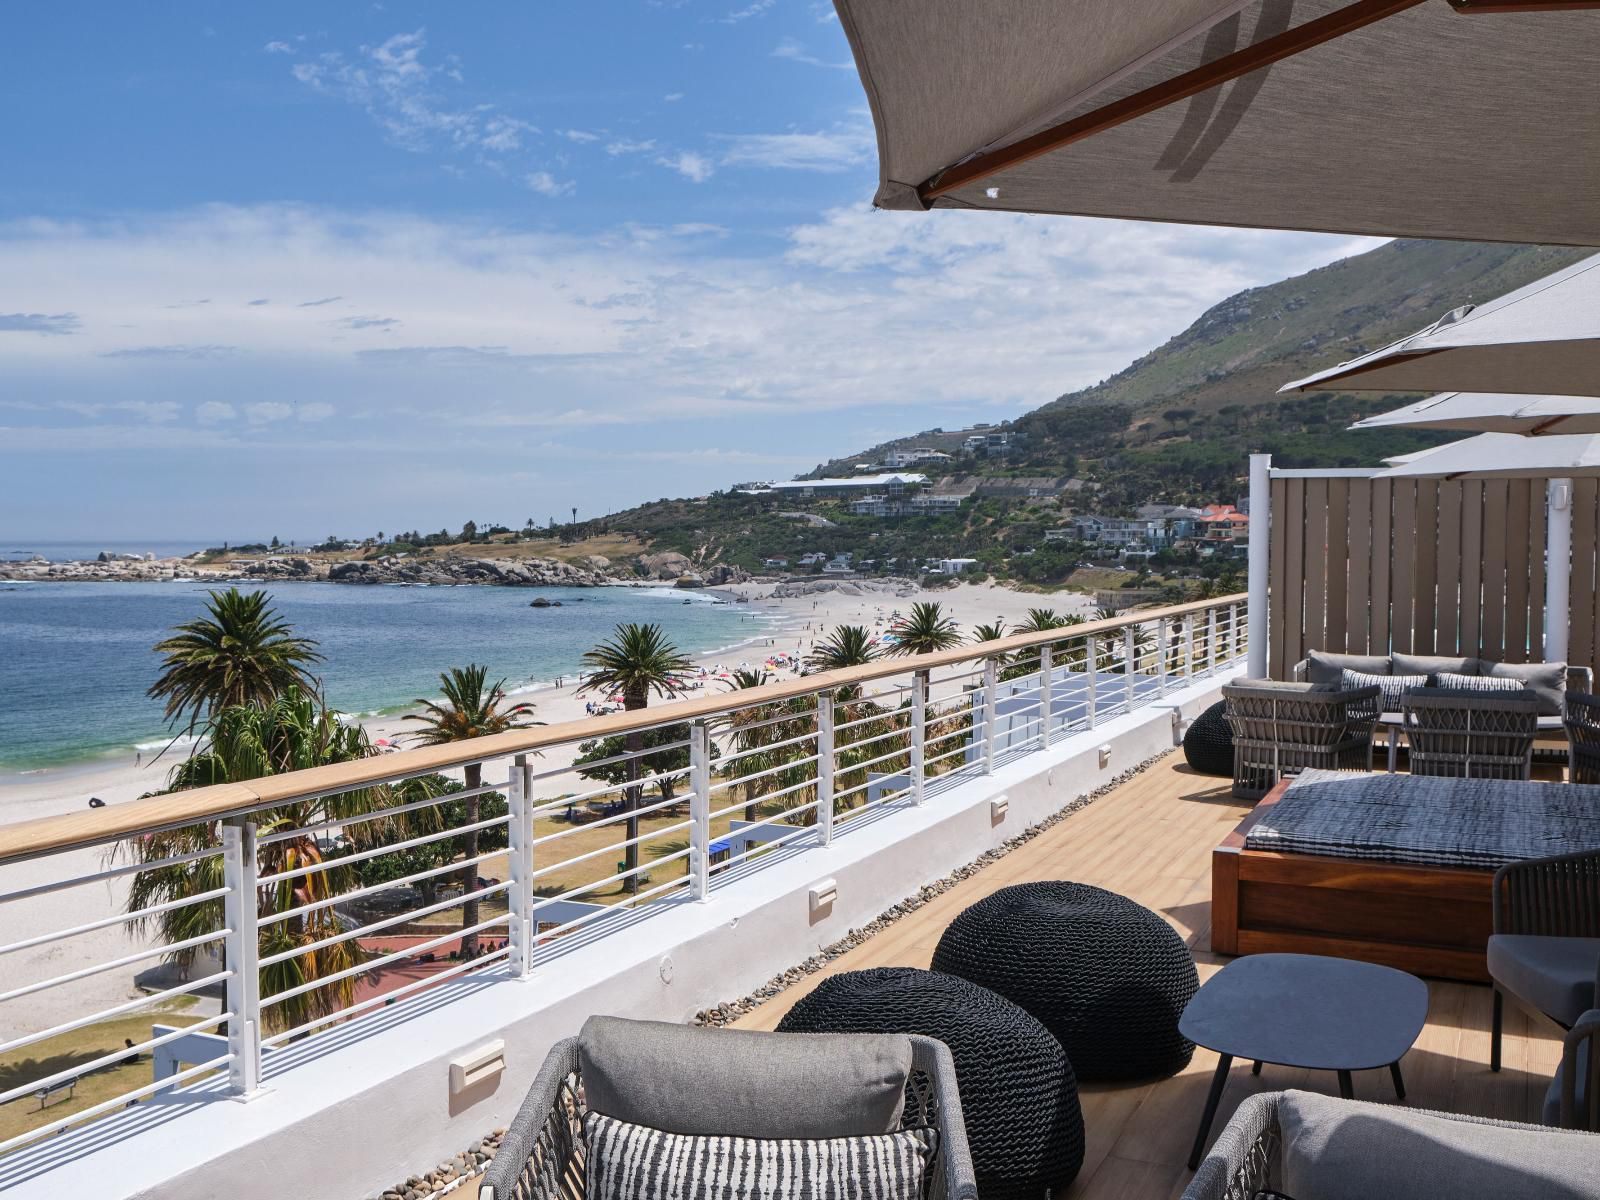 The Marly Boutique Hotel Camps Bay Cape Town Western Cape South Africa Balcony, Architecture, Beach, Nature, Sand, Palm Tree, Plant, Wood